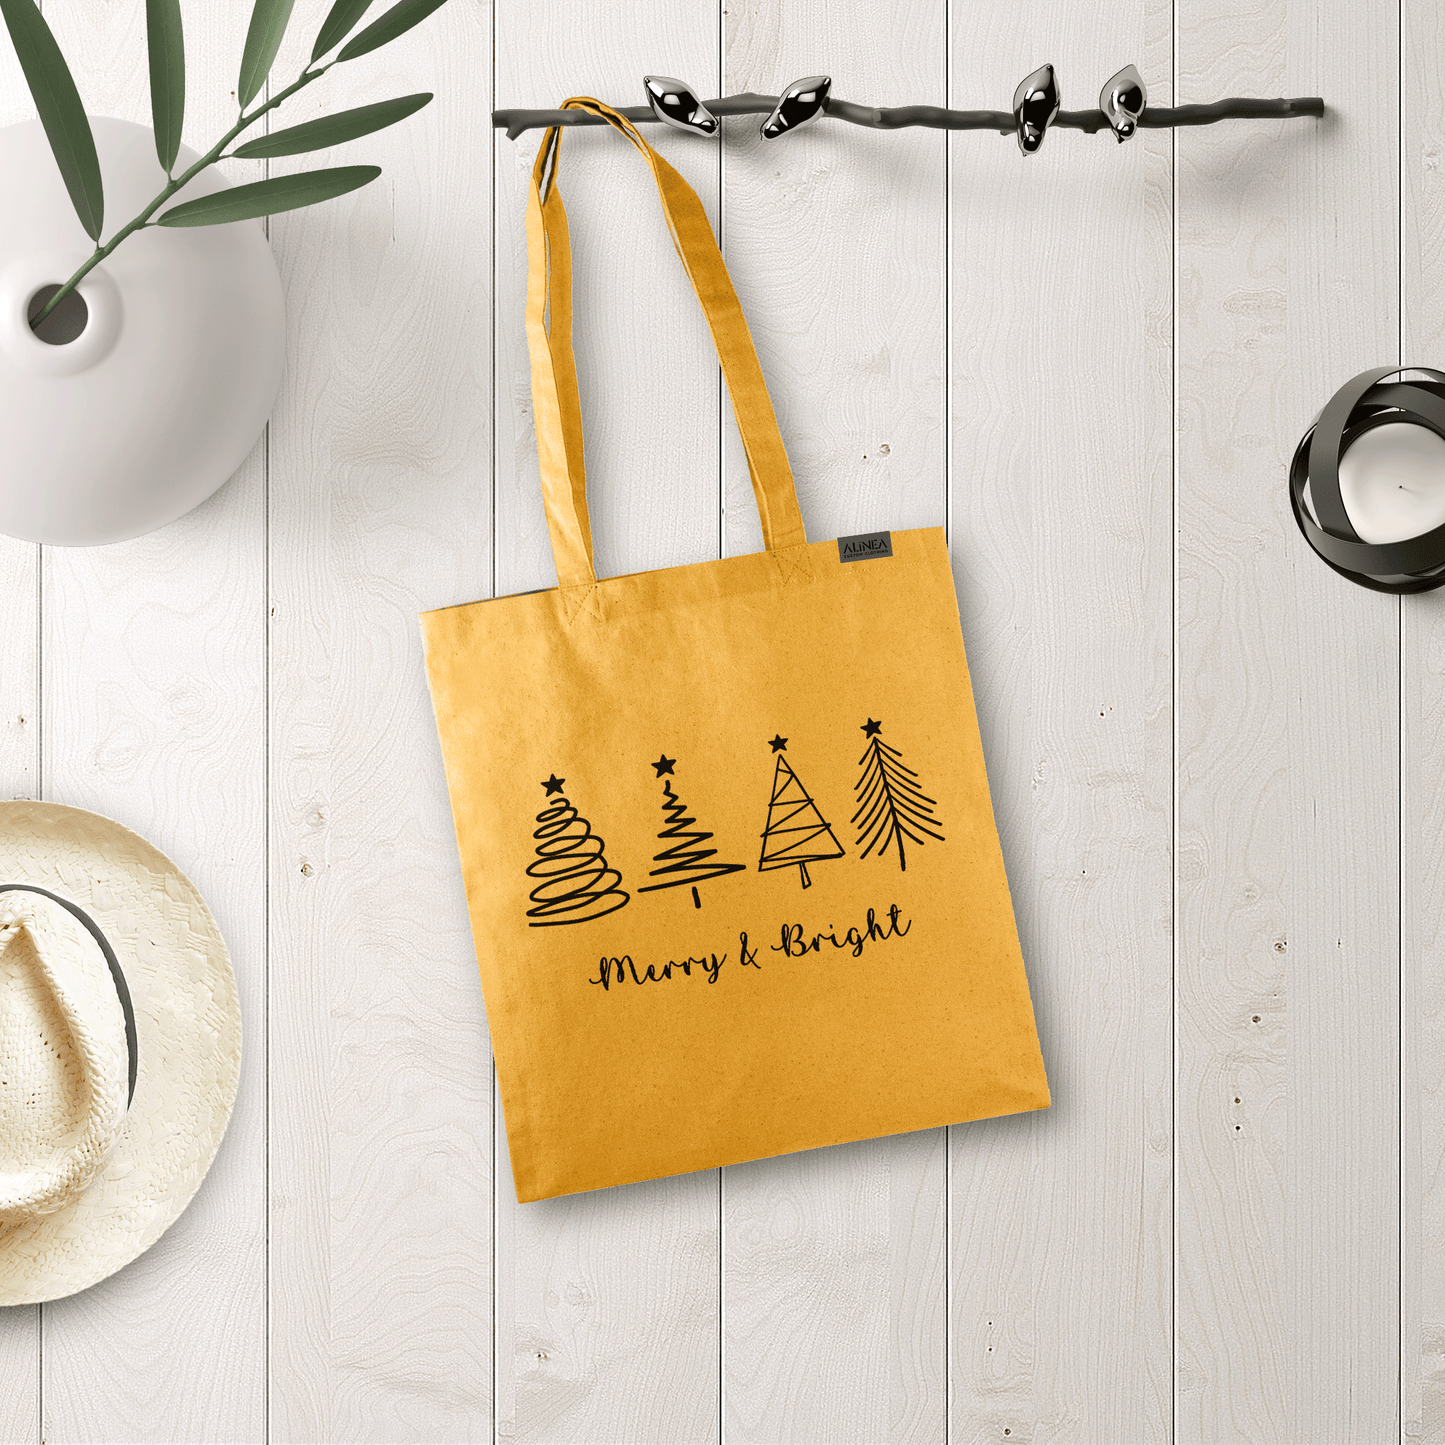 Merry & Bright Tote Bag